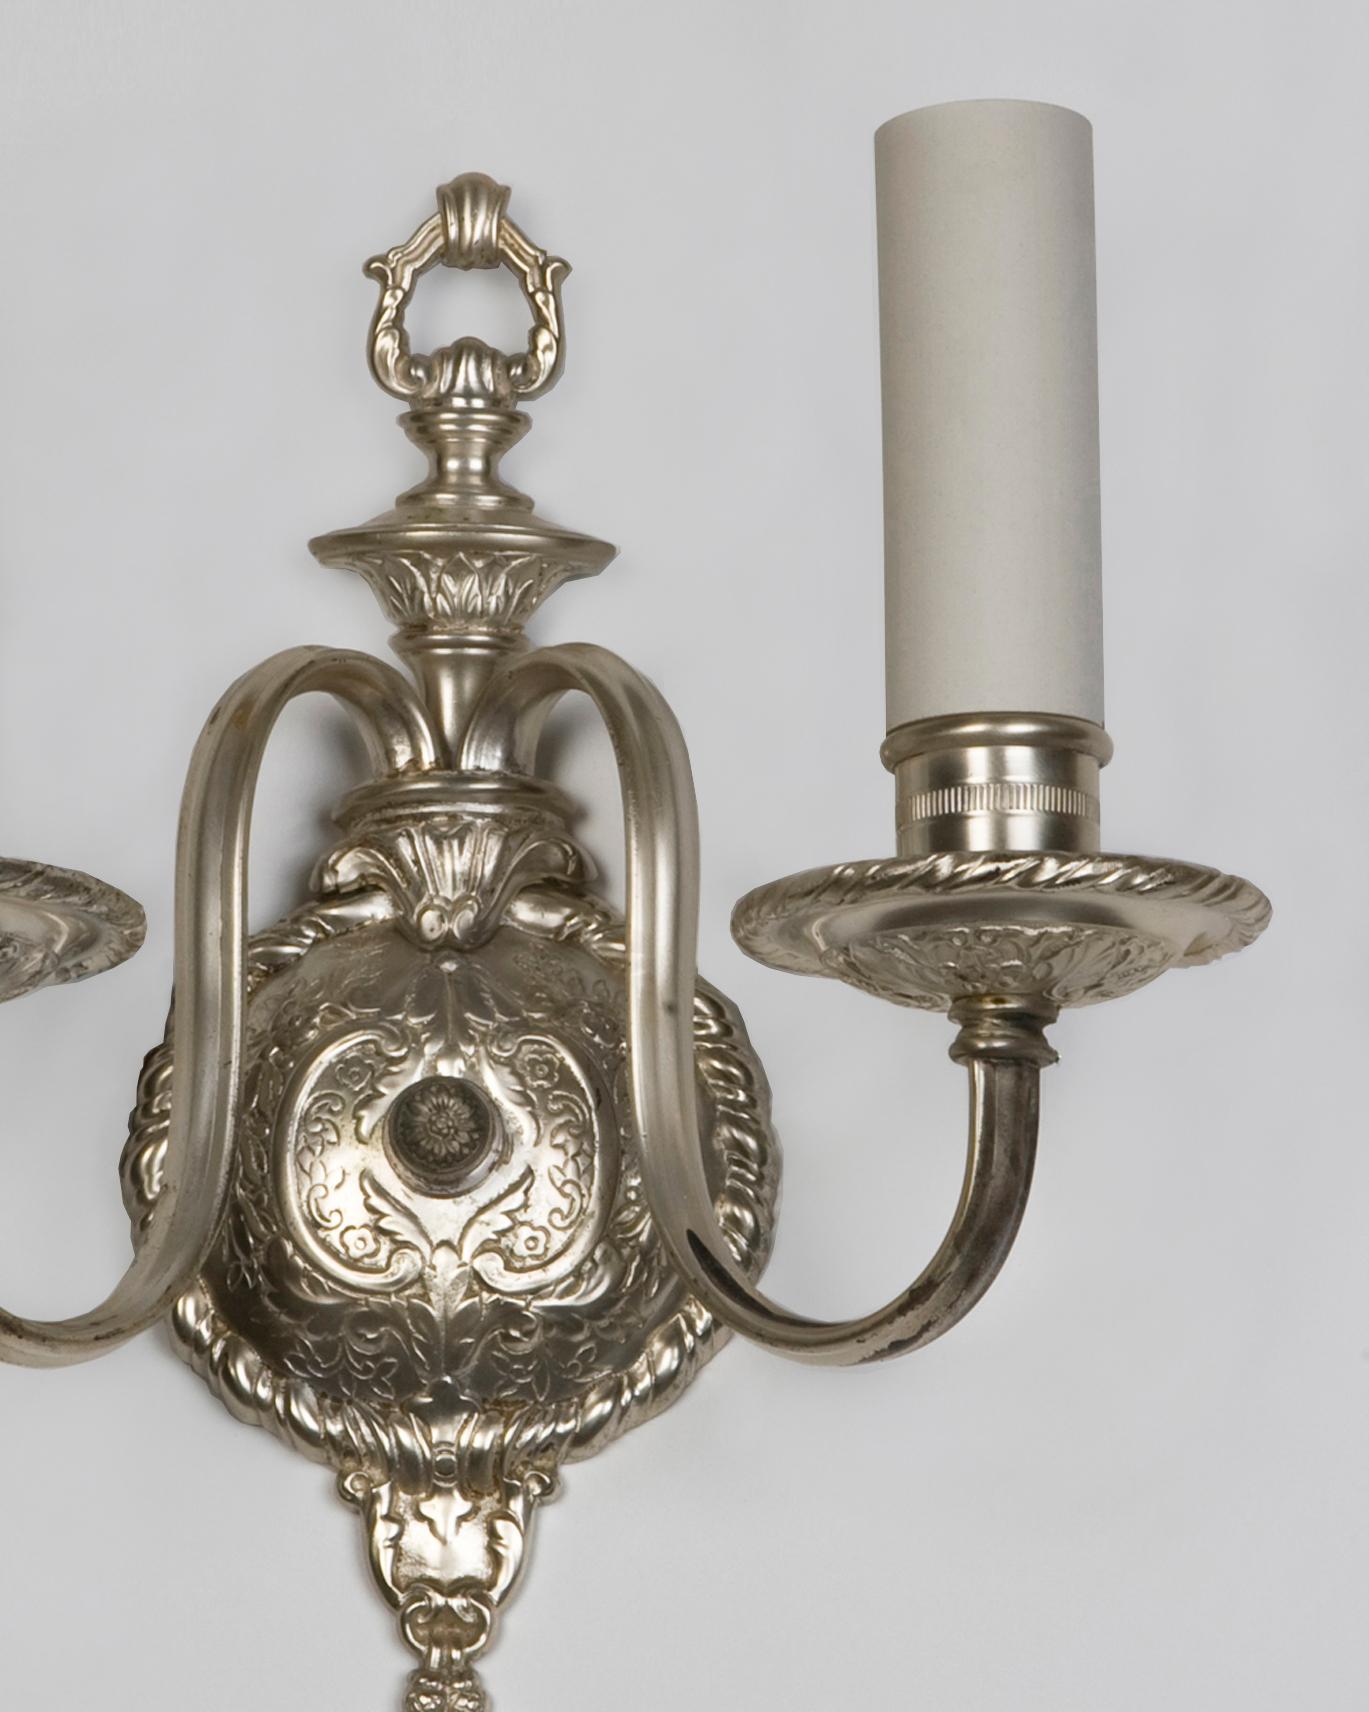 Baroque Two Arm Antique Silver Plate Sconces with Intricate Foliate Details, Circa 1910s